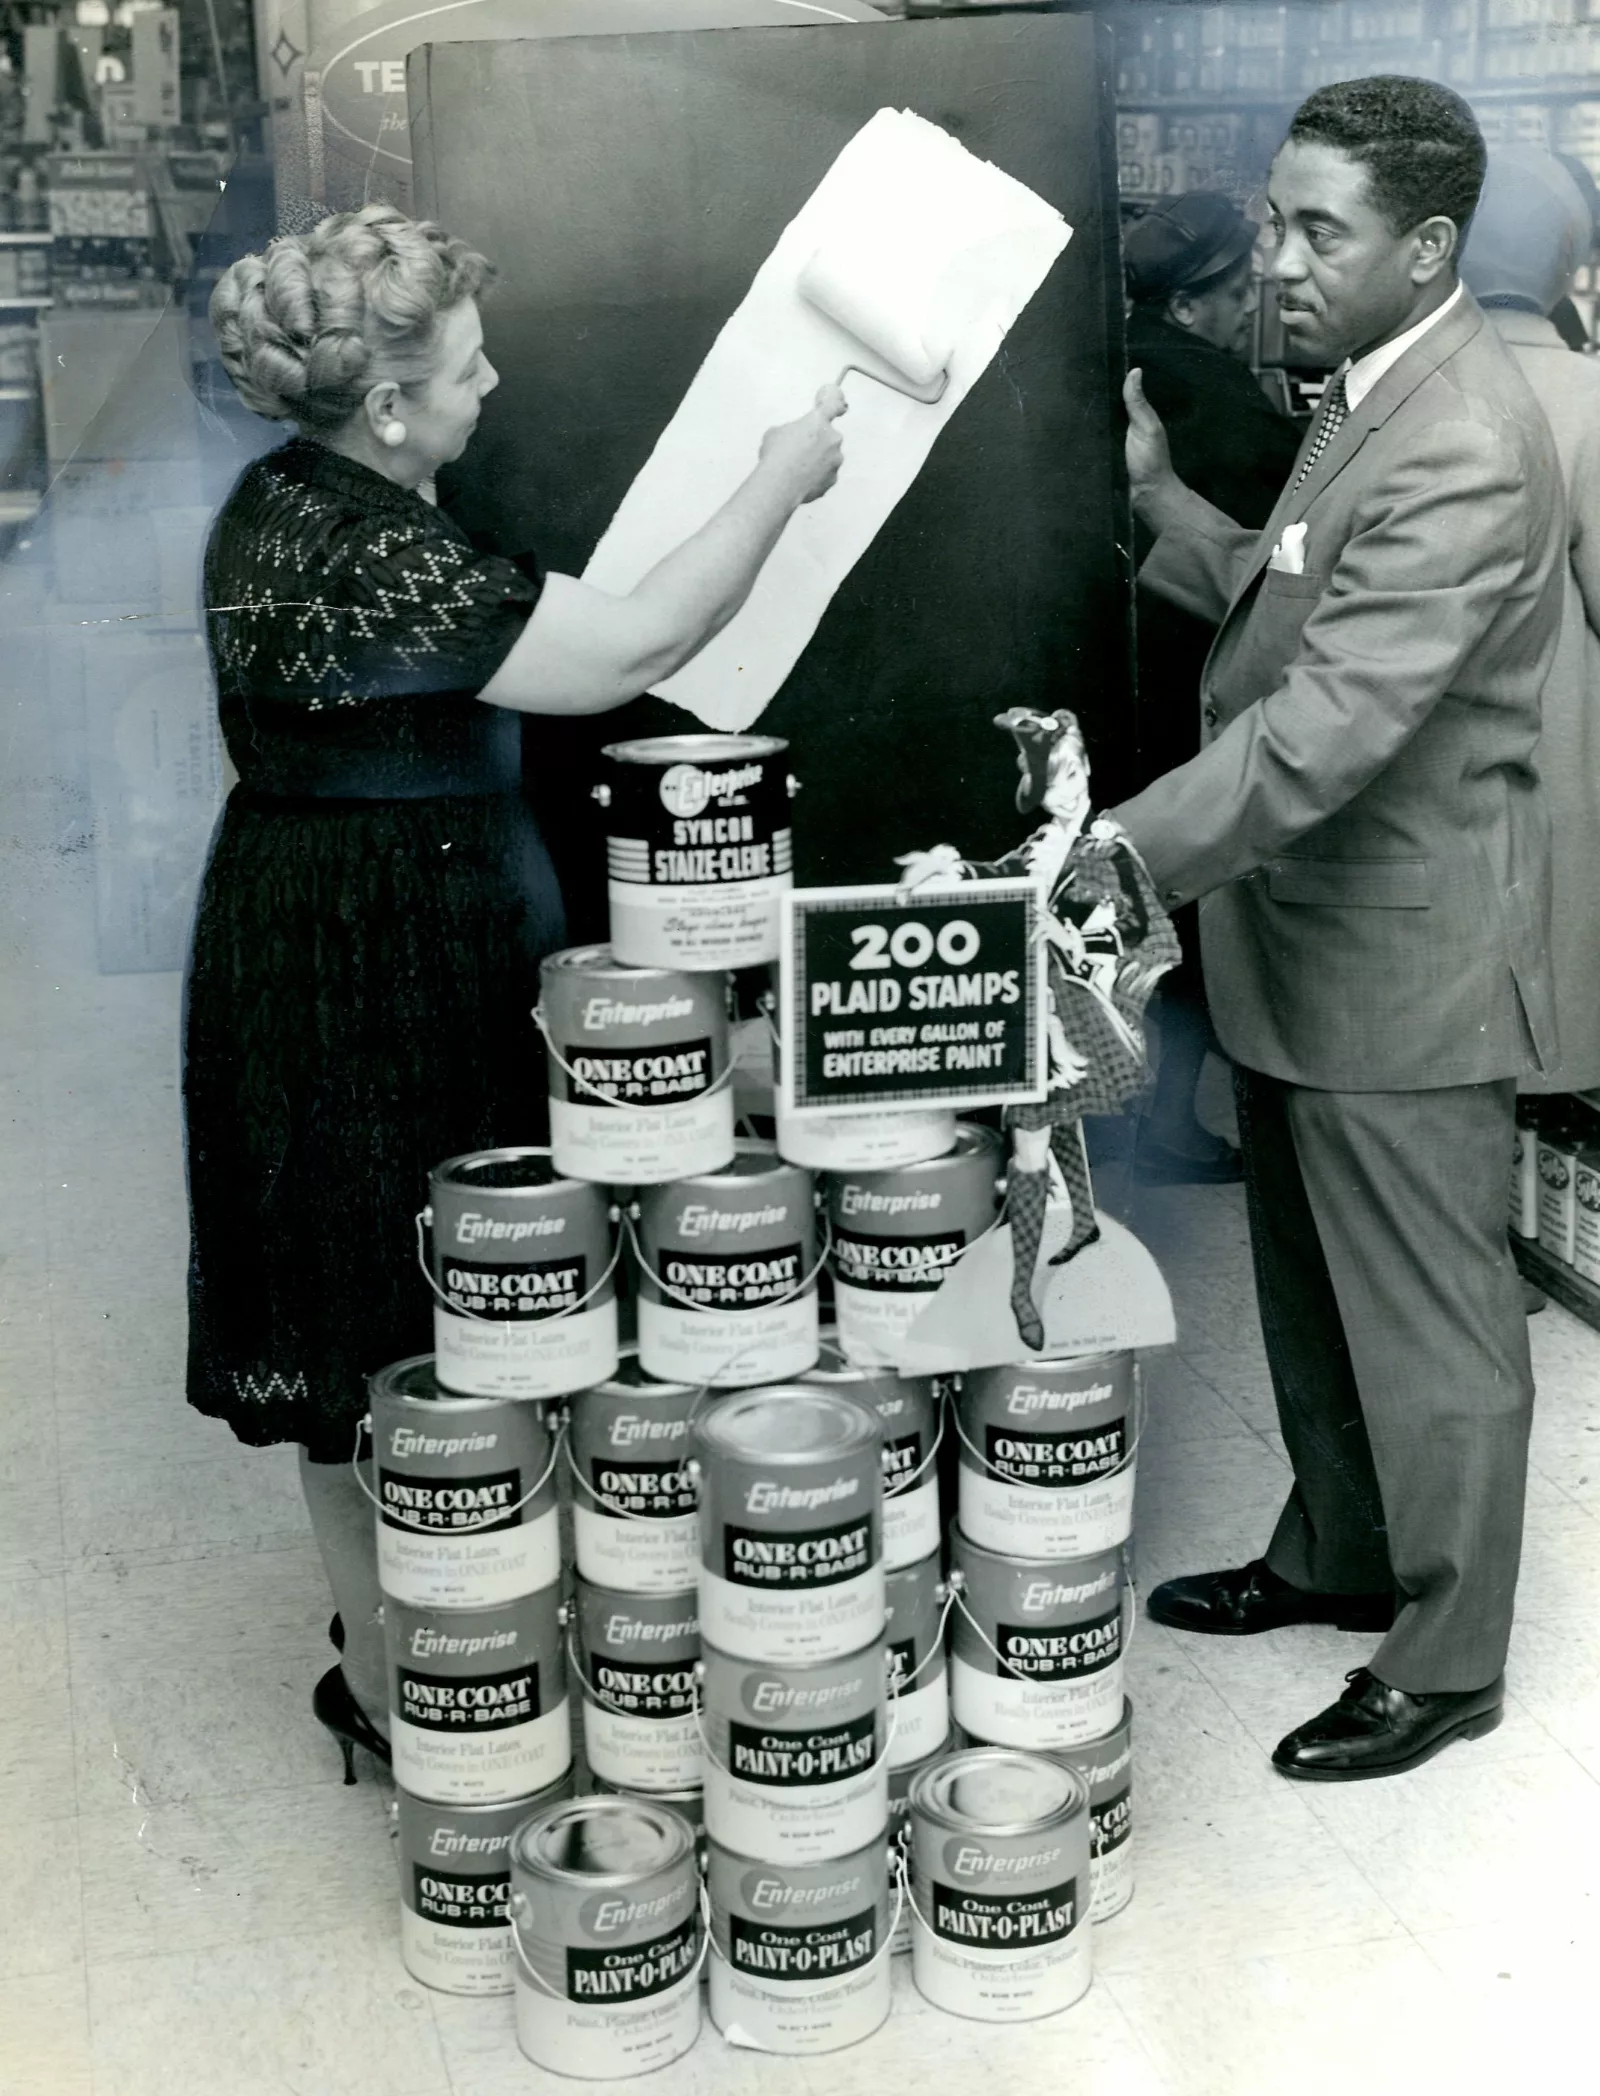 Eunice demonstrating one coat paint at Ebony Paint with store manager Harold Perkins. They are standing behind a display of paint cans.